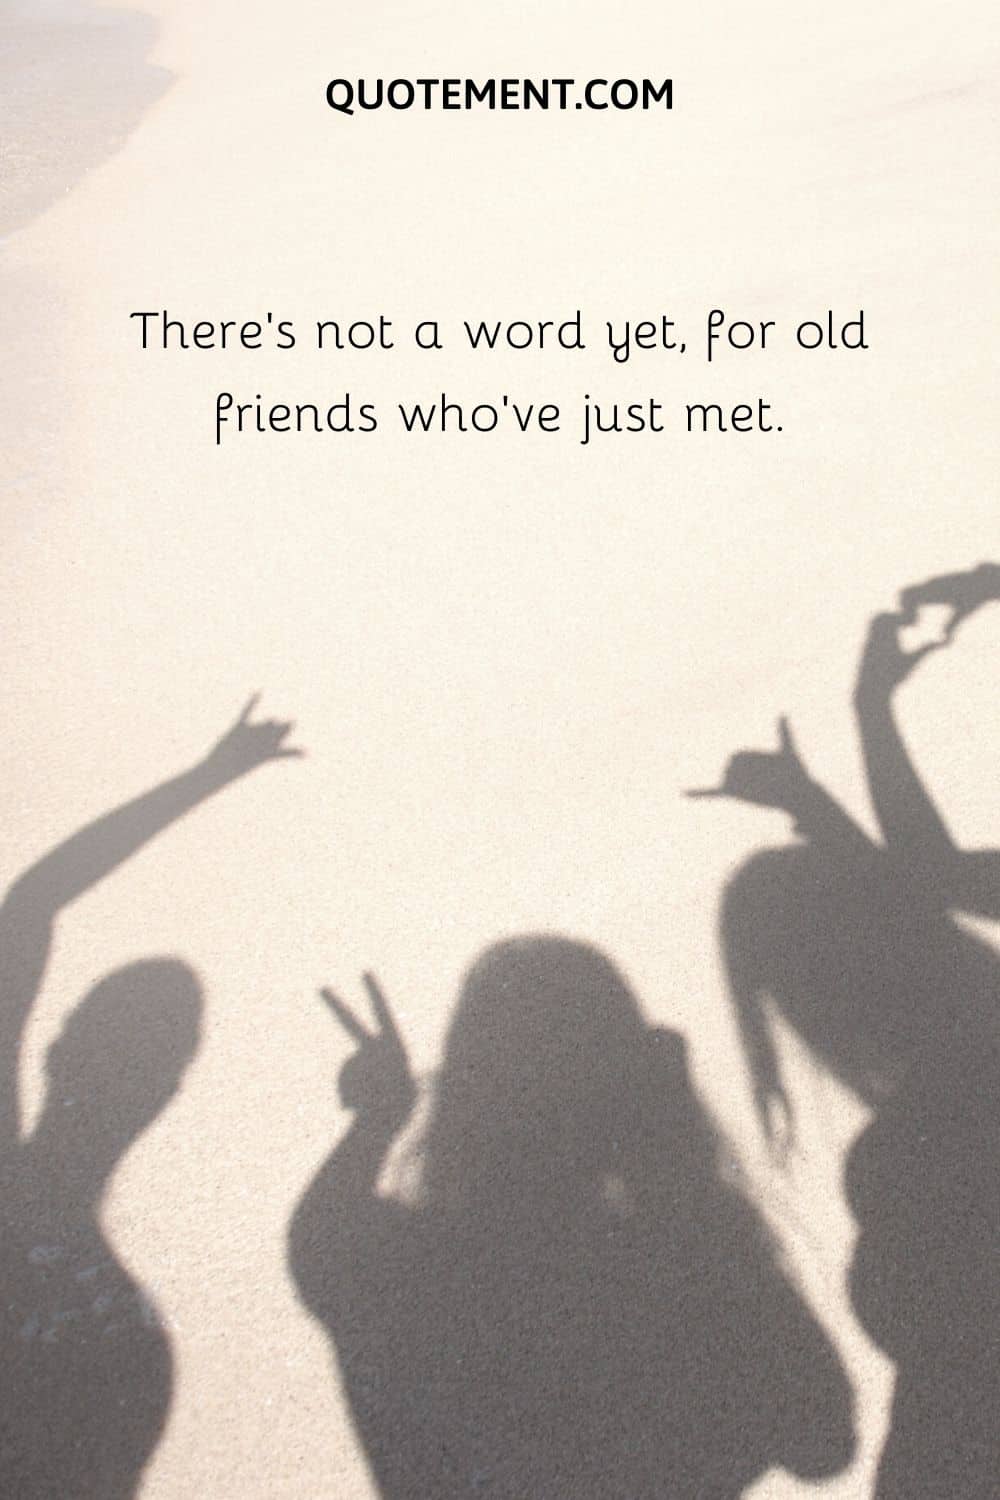 There’s not a word yet, for old friends who’ve just met